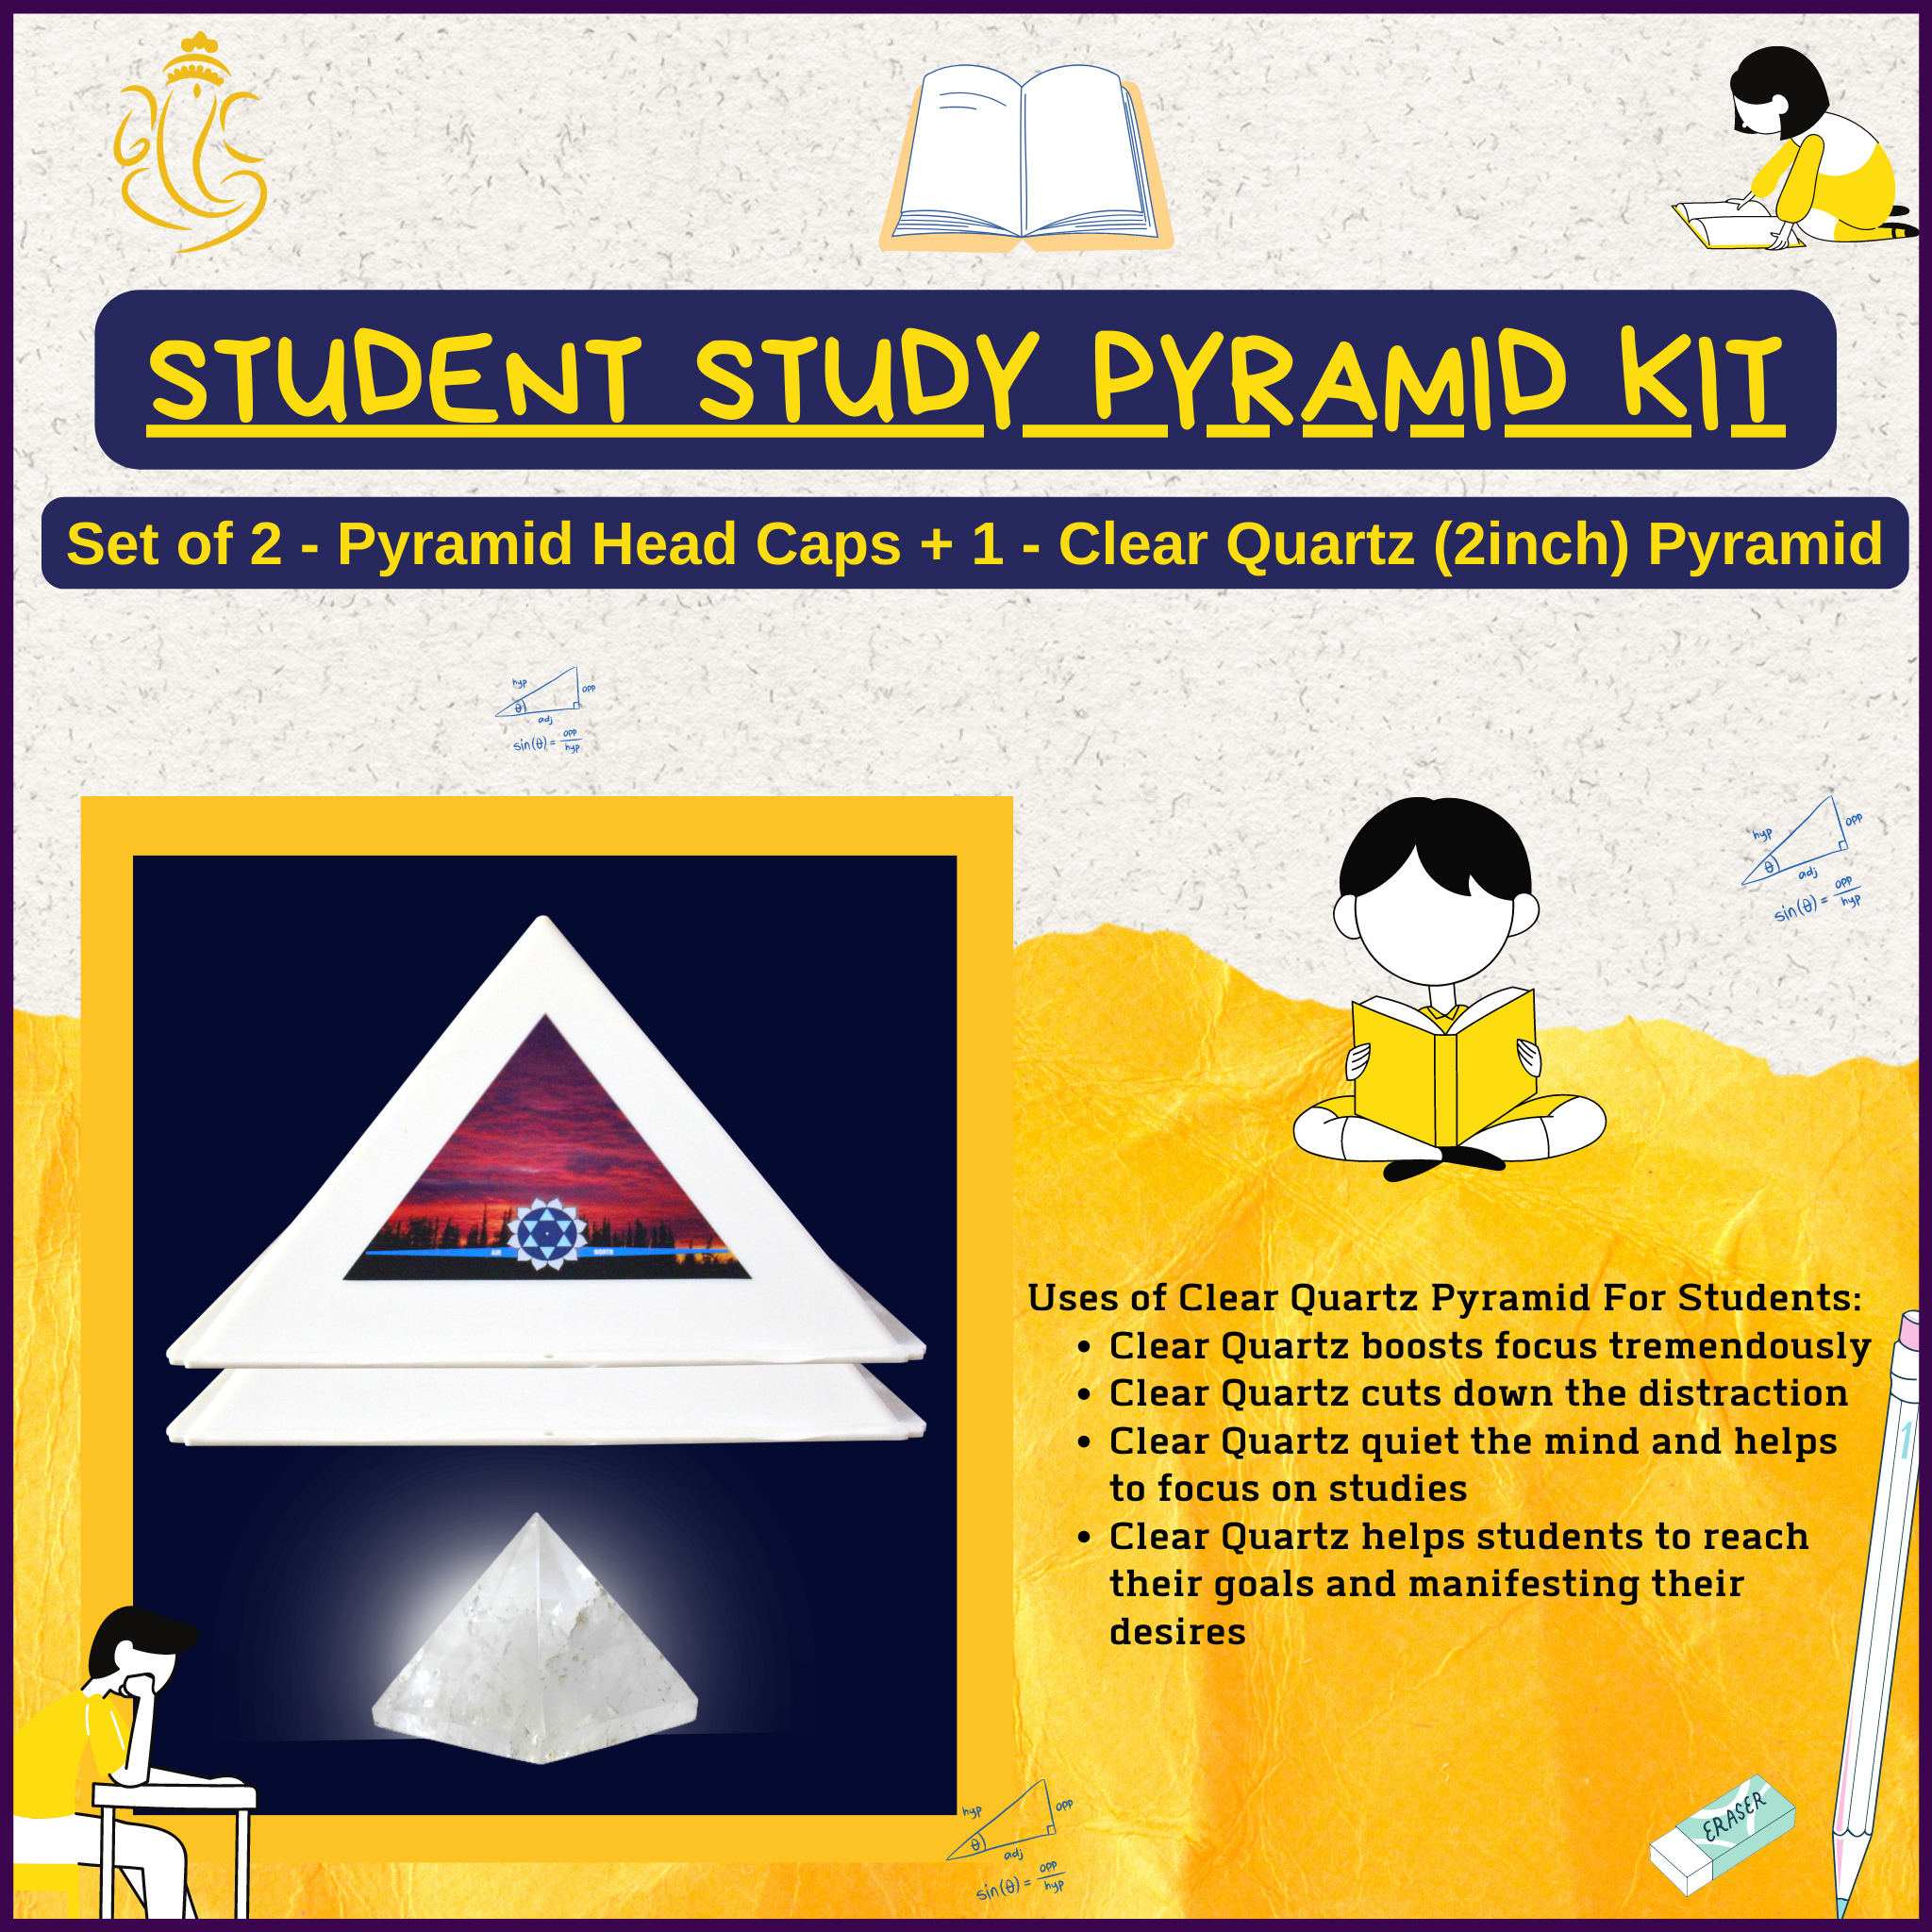 Student Study Pyramid Kit - Set of 2 - Plastic Pyramid Head Caps + 1 - Clear Quartz Pyramid Stone(2inch) for Students For Scoring Good Marks In Exams - Genuine and Certified